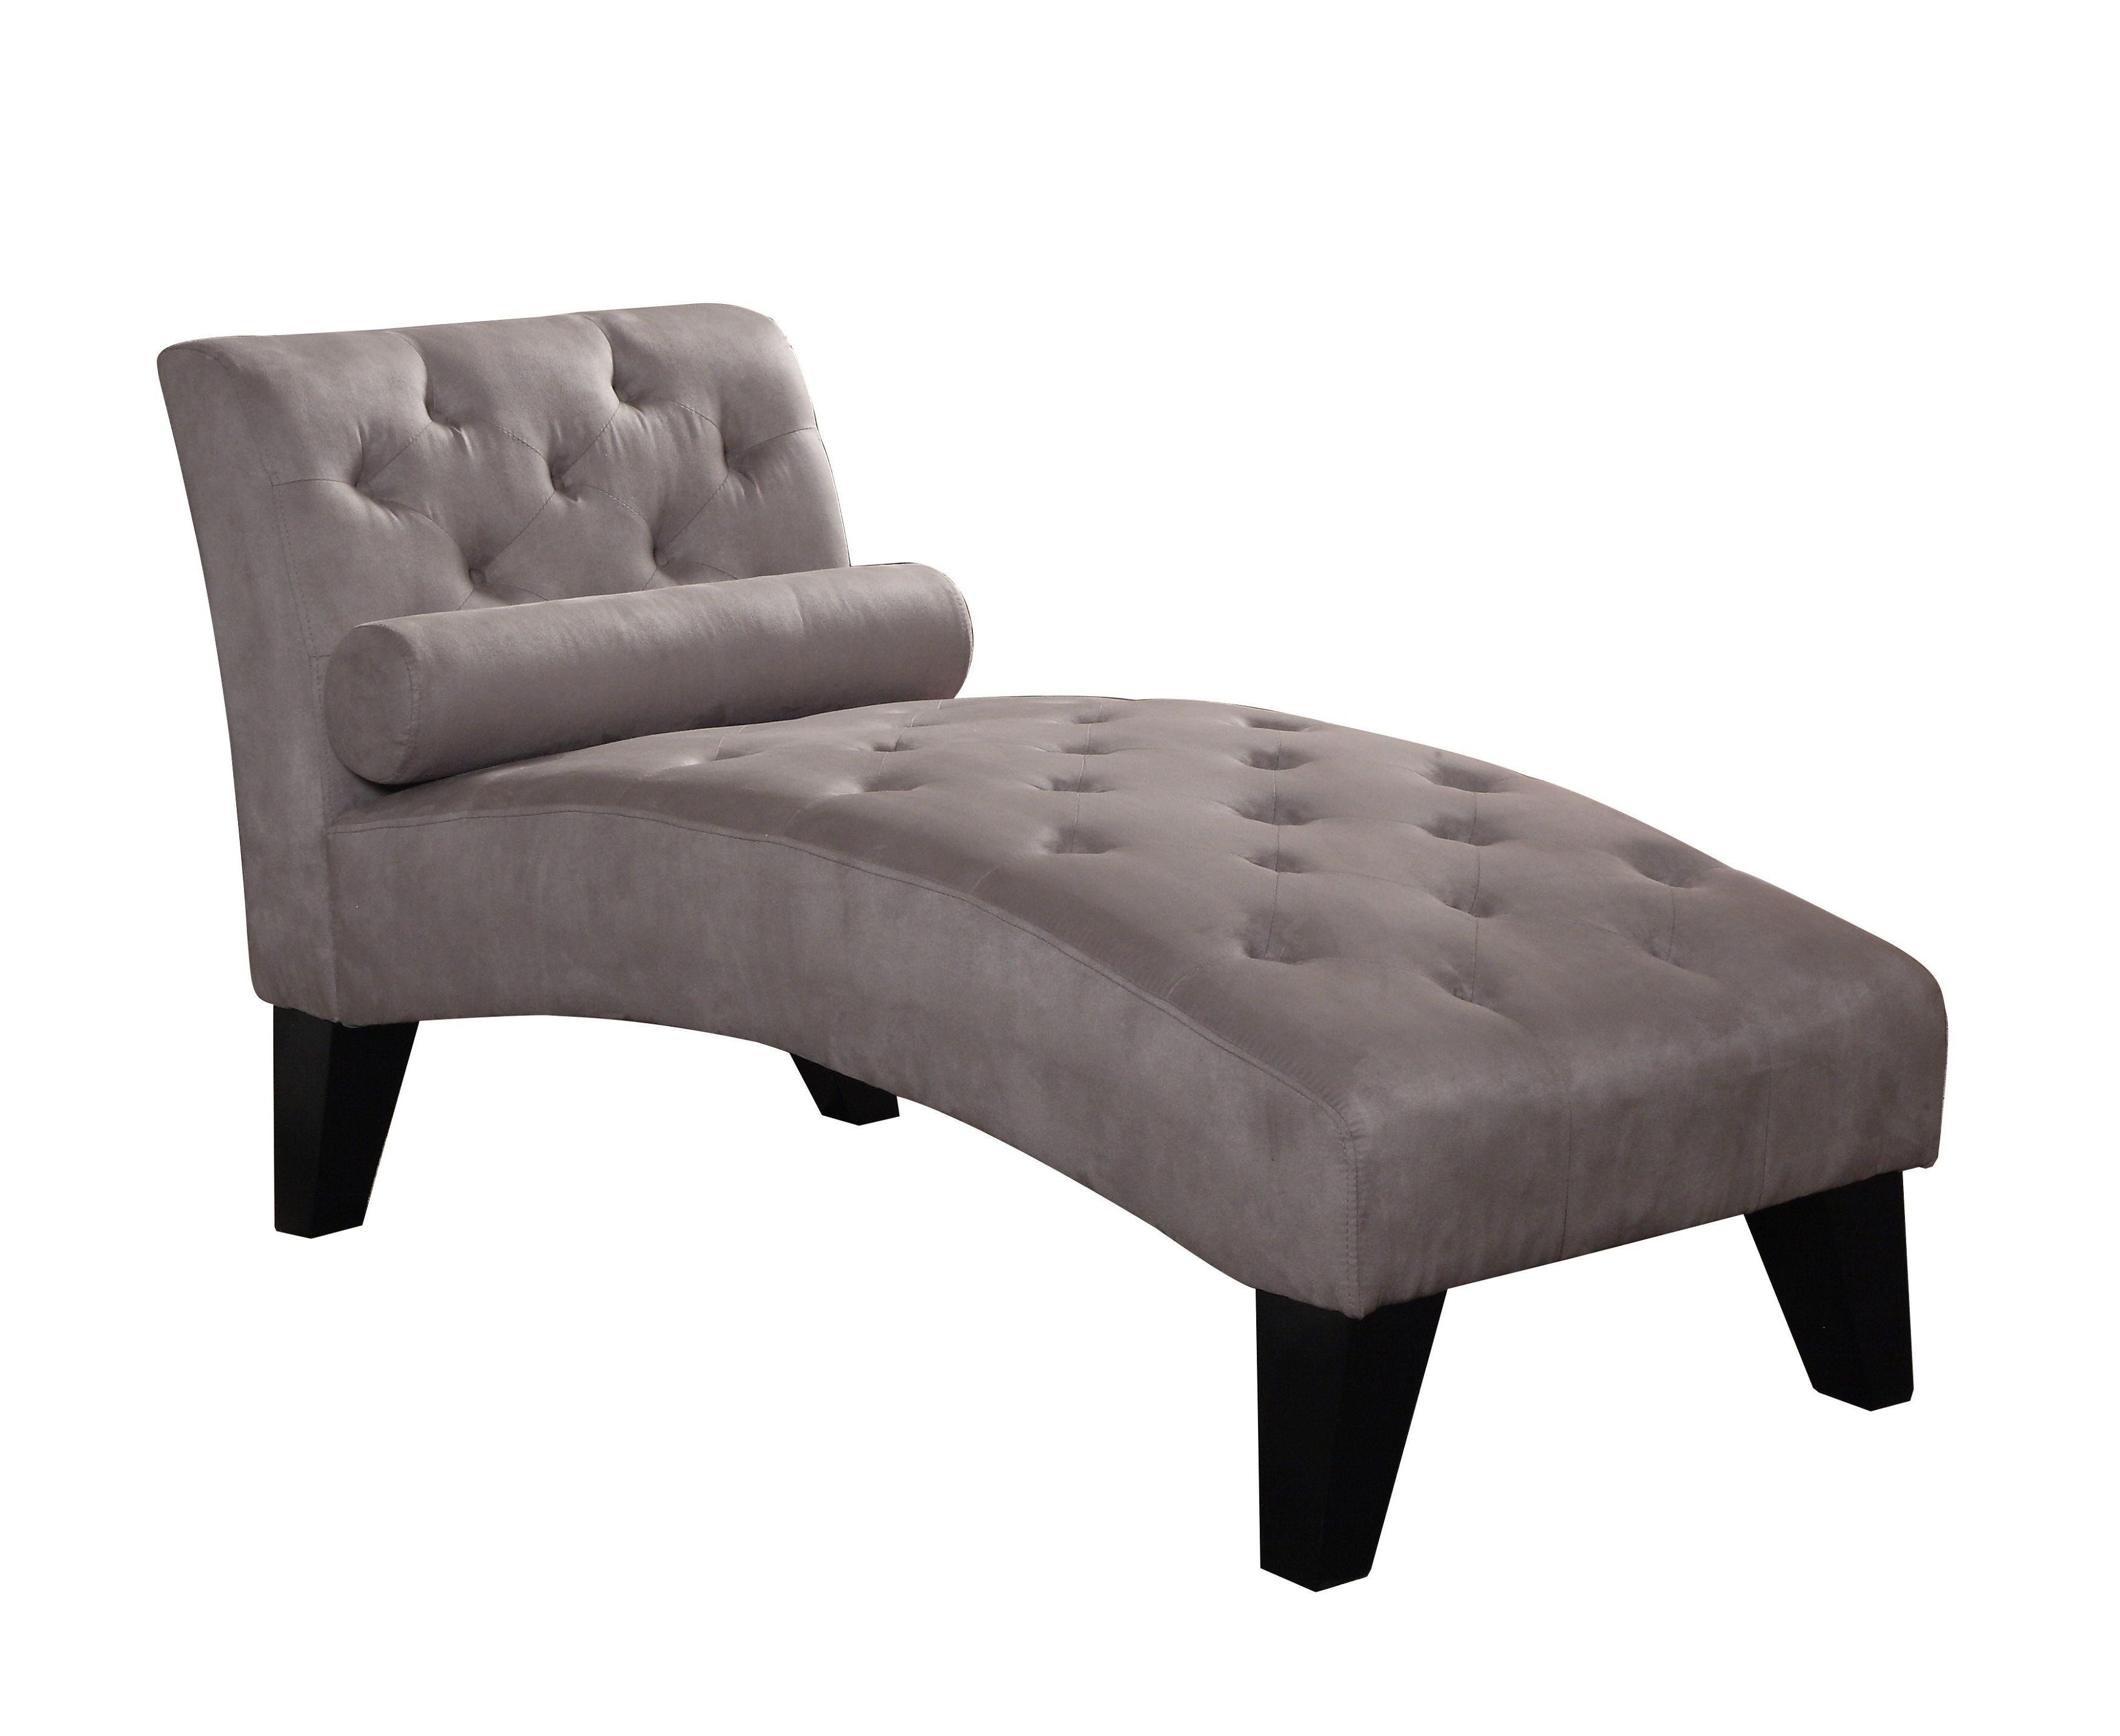 Wayfair With Well Known Green Chaise Lounge Chairs (View 8 of 15)